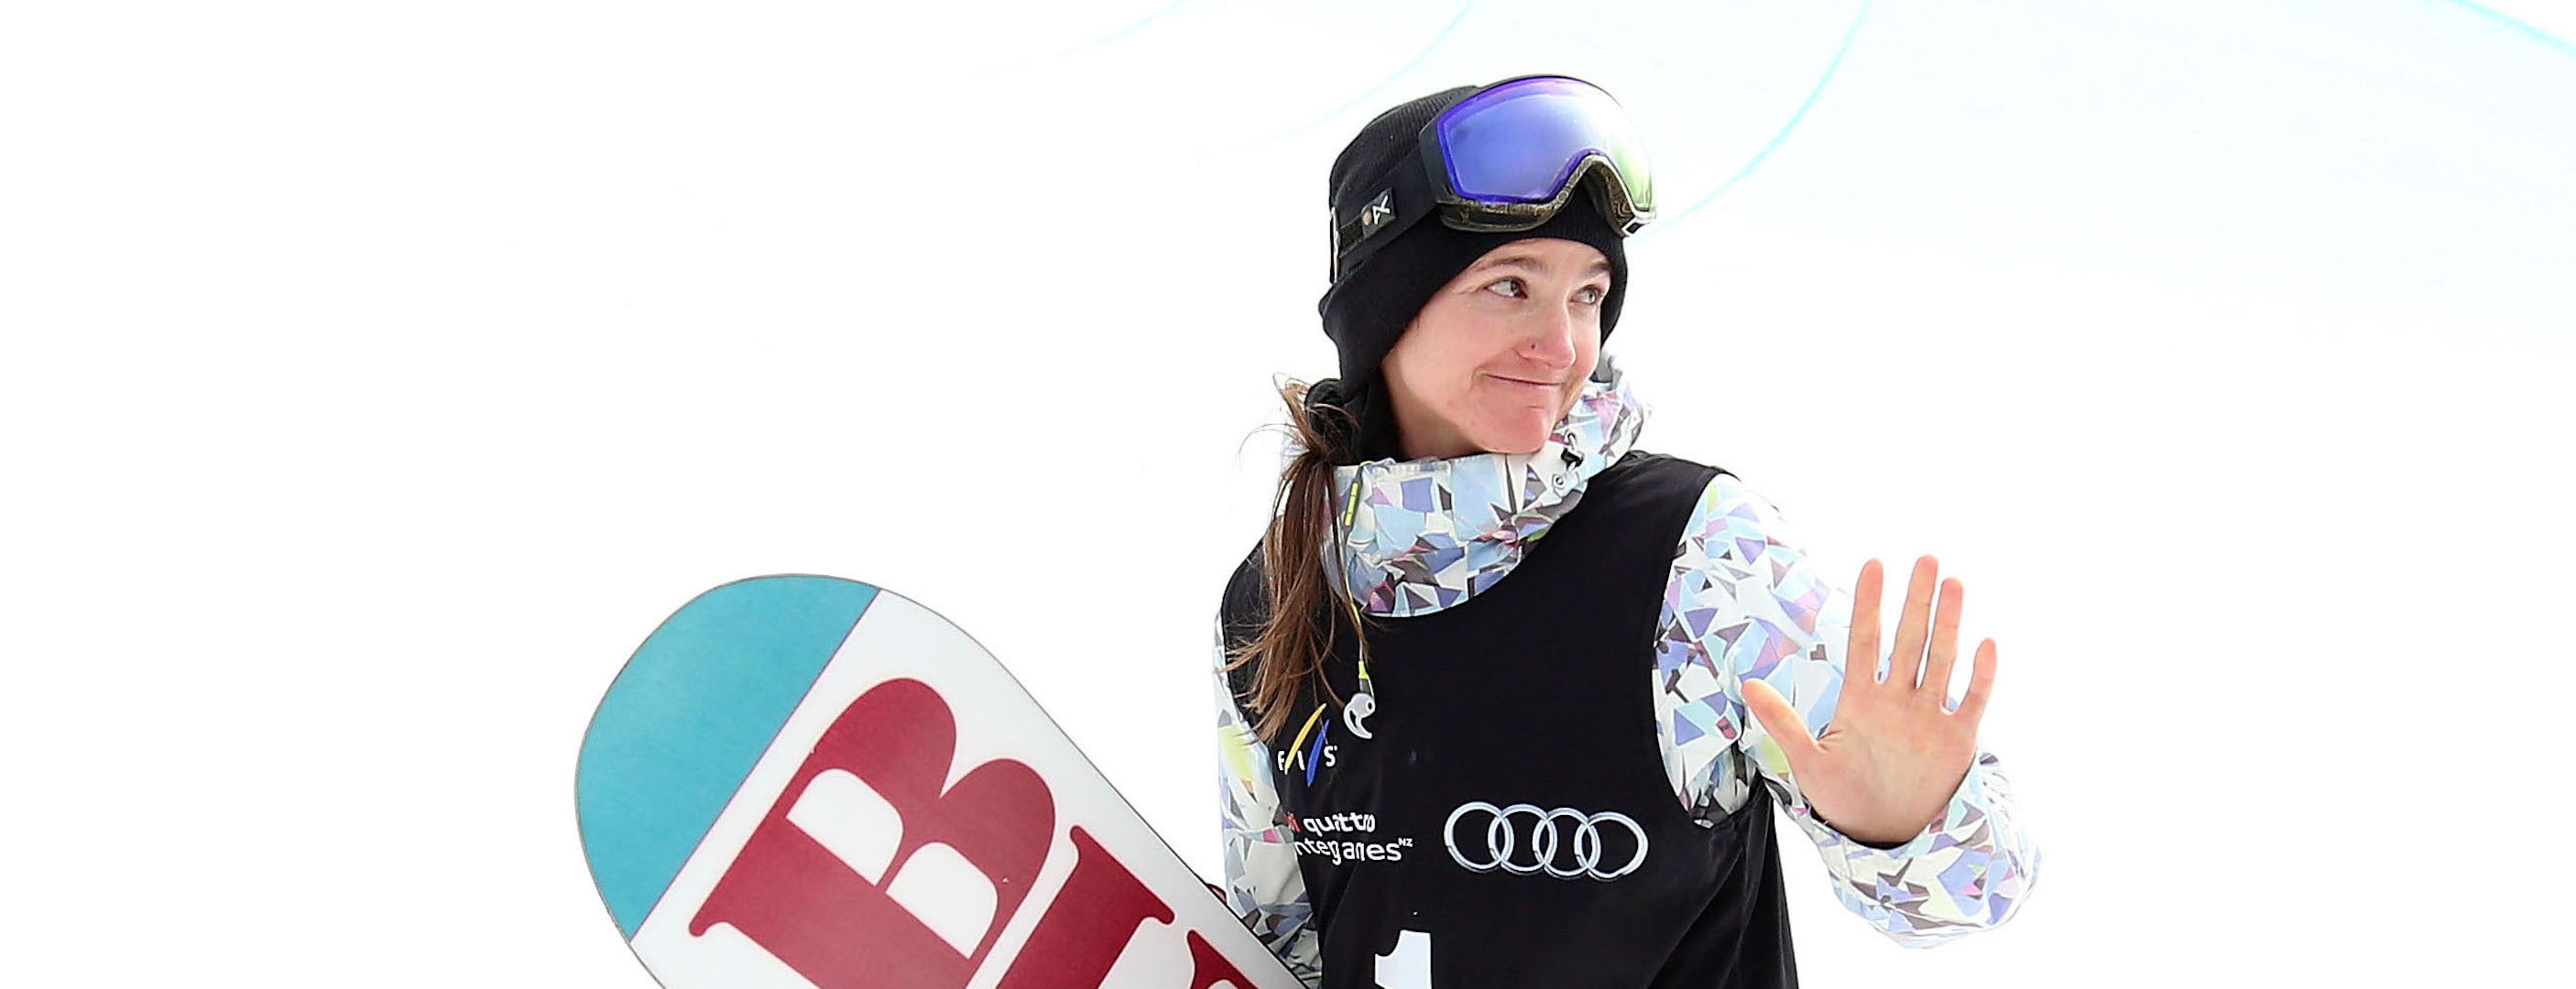 Kelly Clark waves to the crowd in the FIS Snowboard World Cup Halfpipe Finals